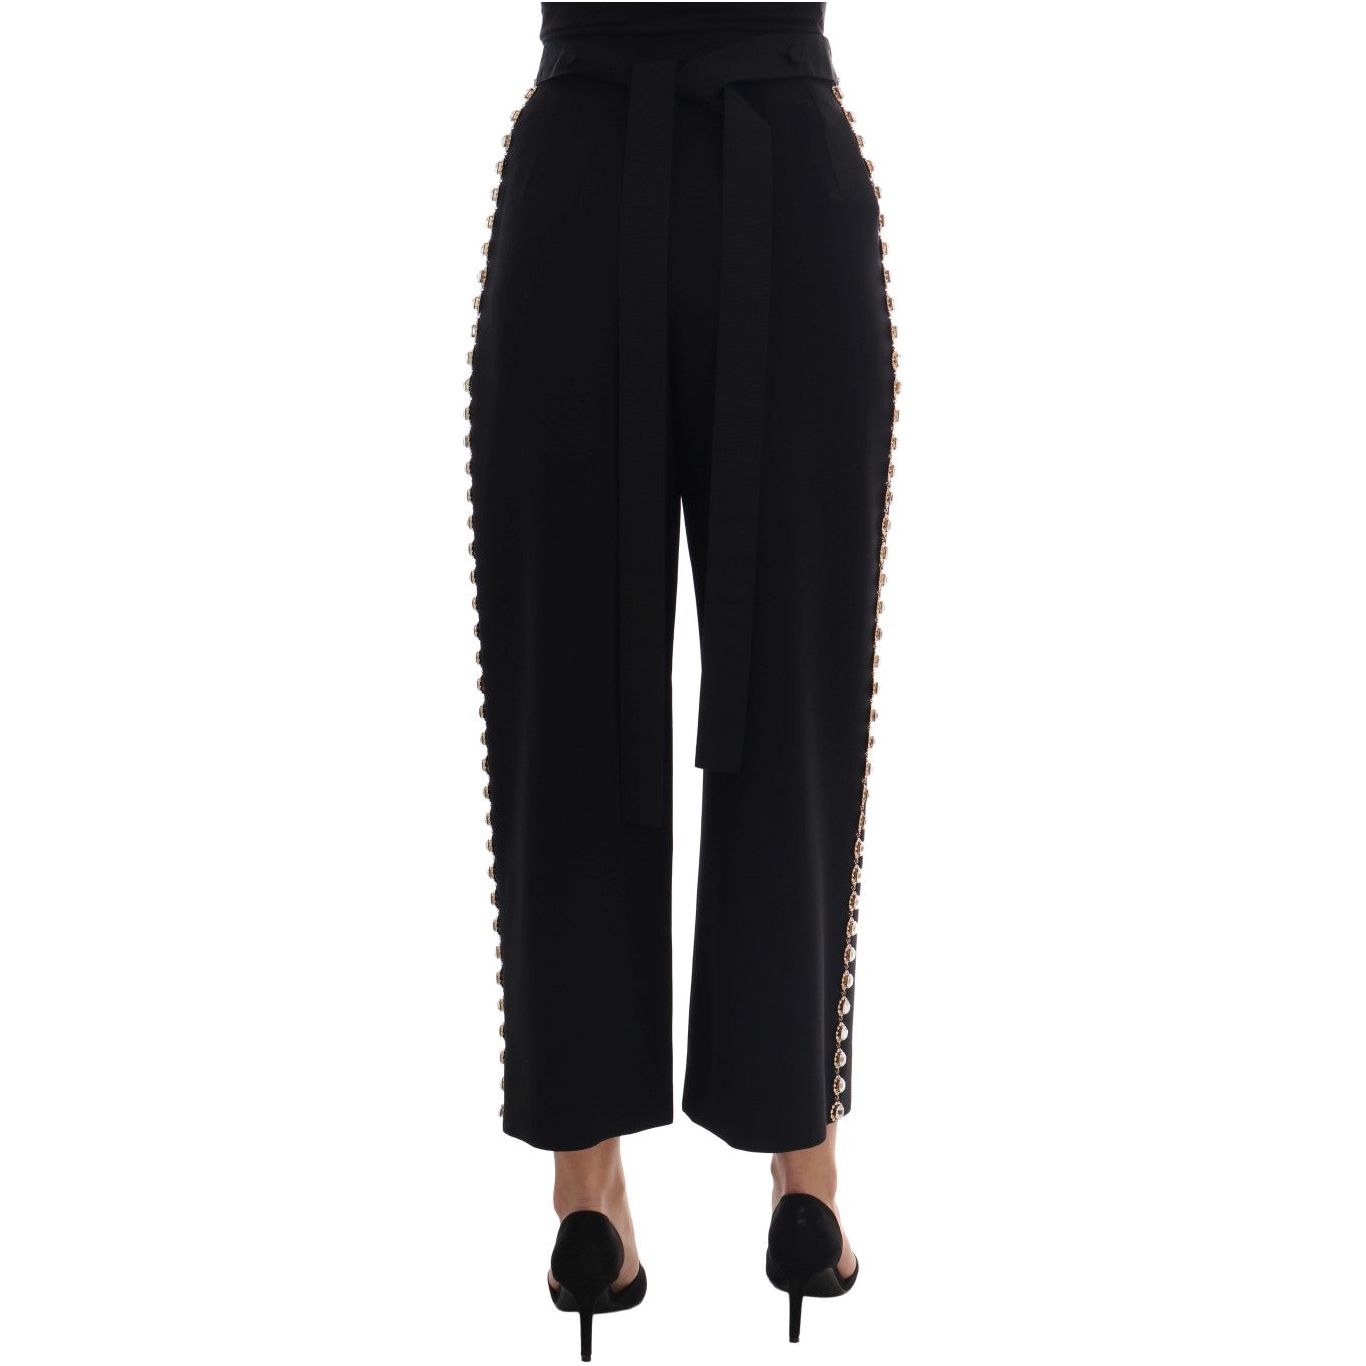 Dolce & Gabbana Elegant High-Waist Ankle Pants with Gold Detailing Jeans & Pants black-wool-stretch-crystal-pants 513120-black-wool-stretch-crystal-pants-2.jpg